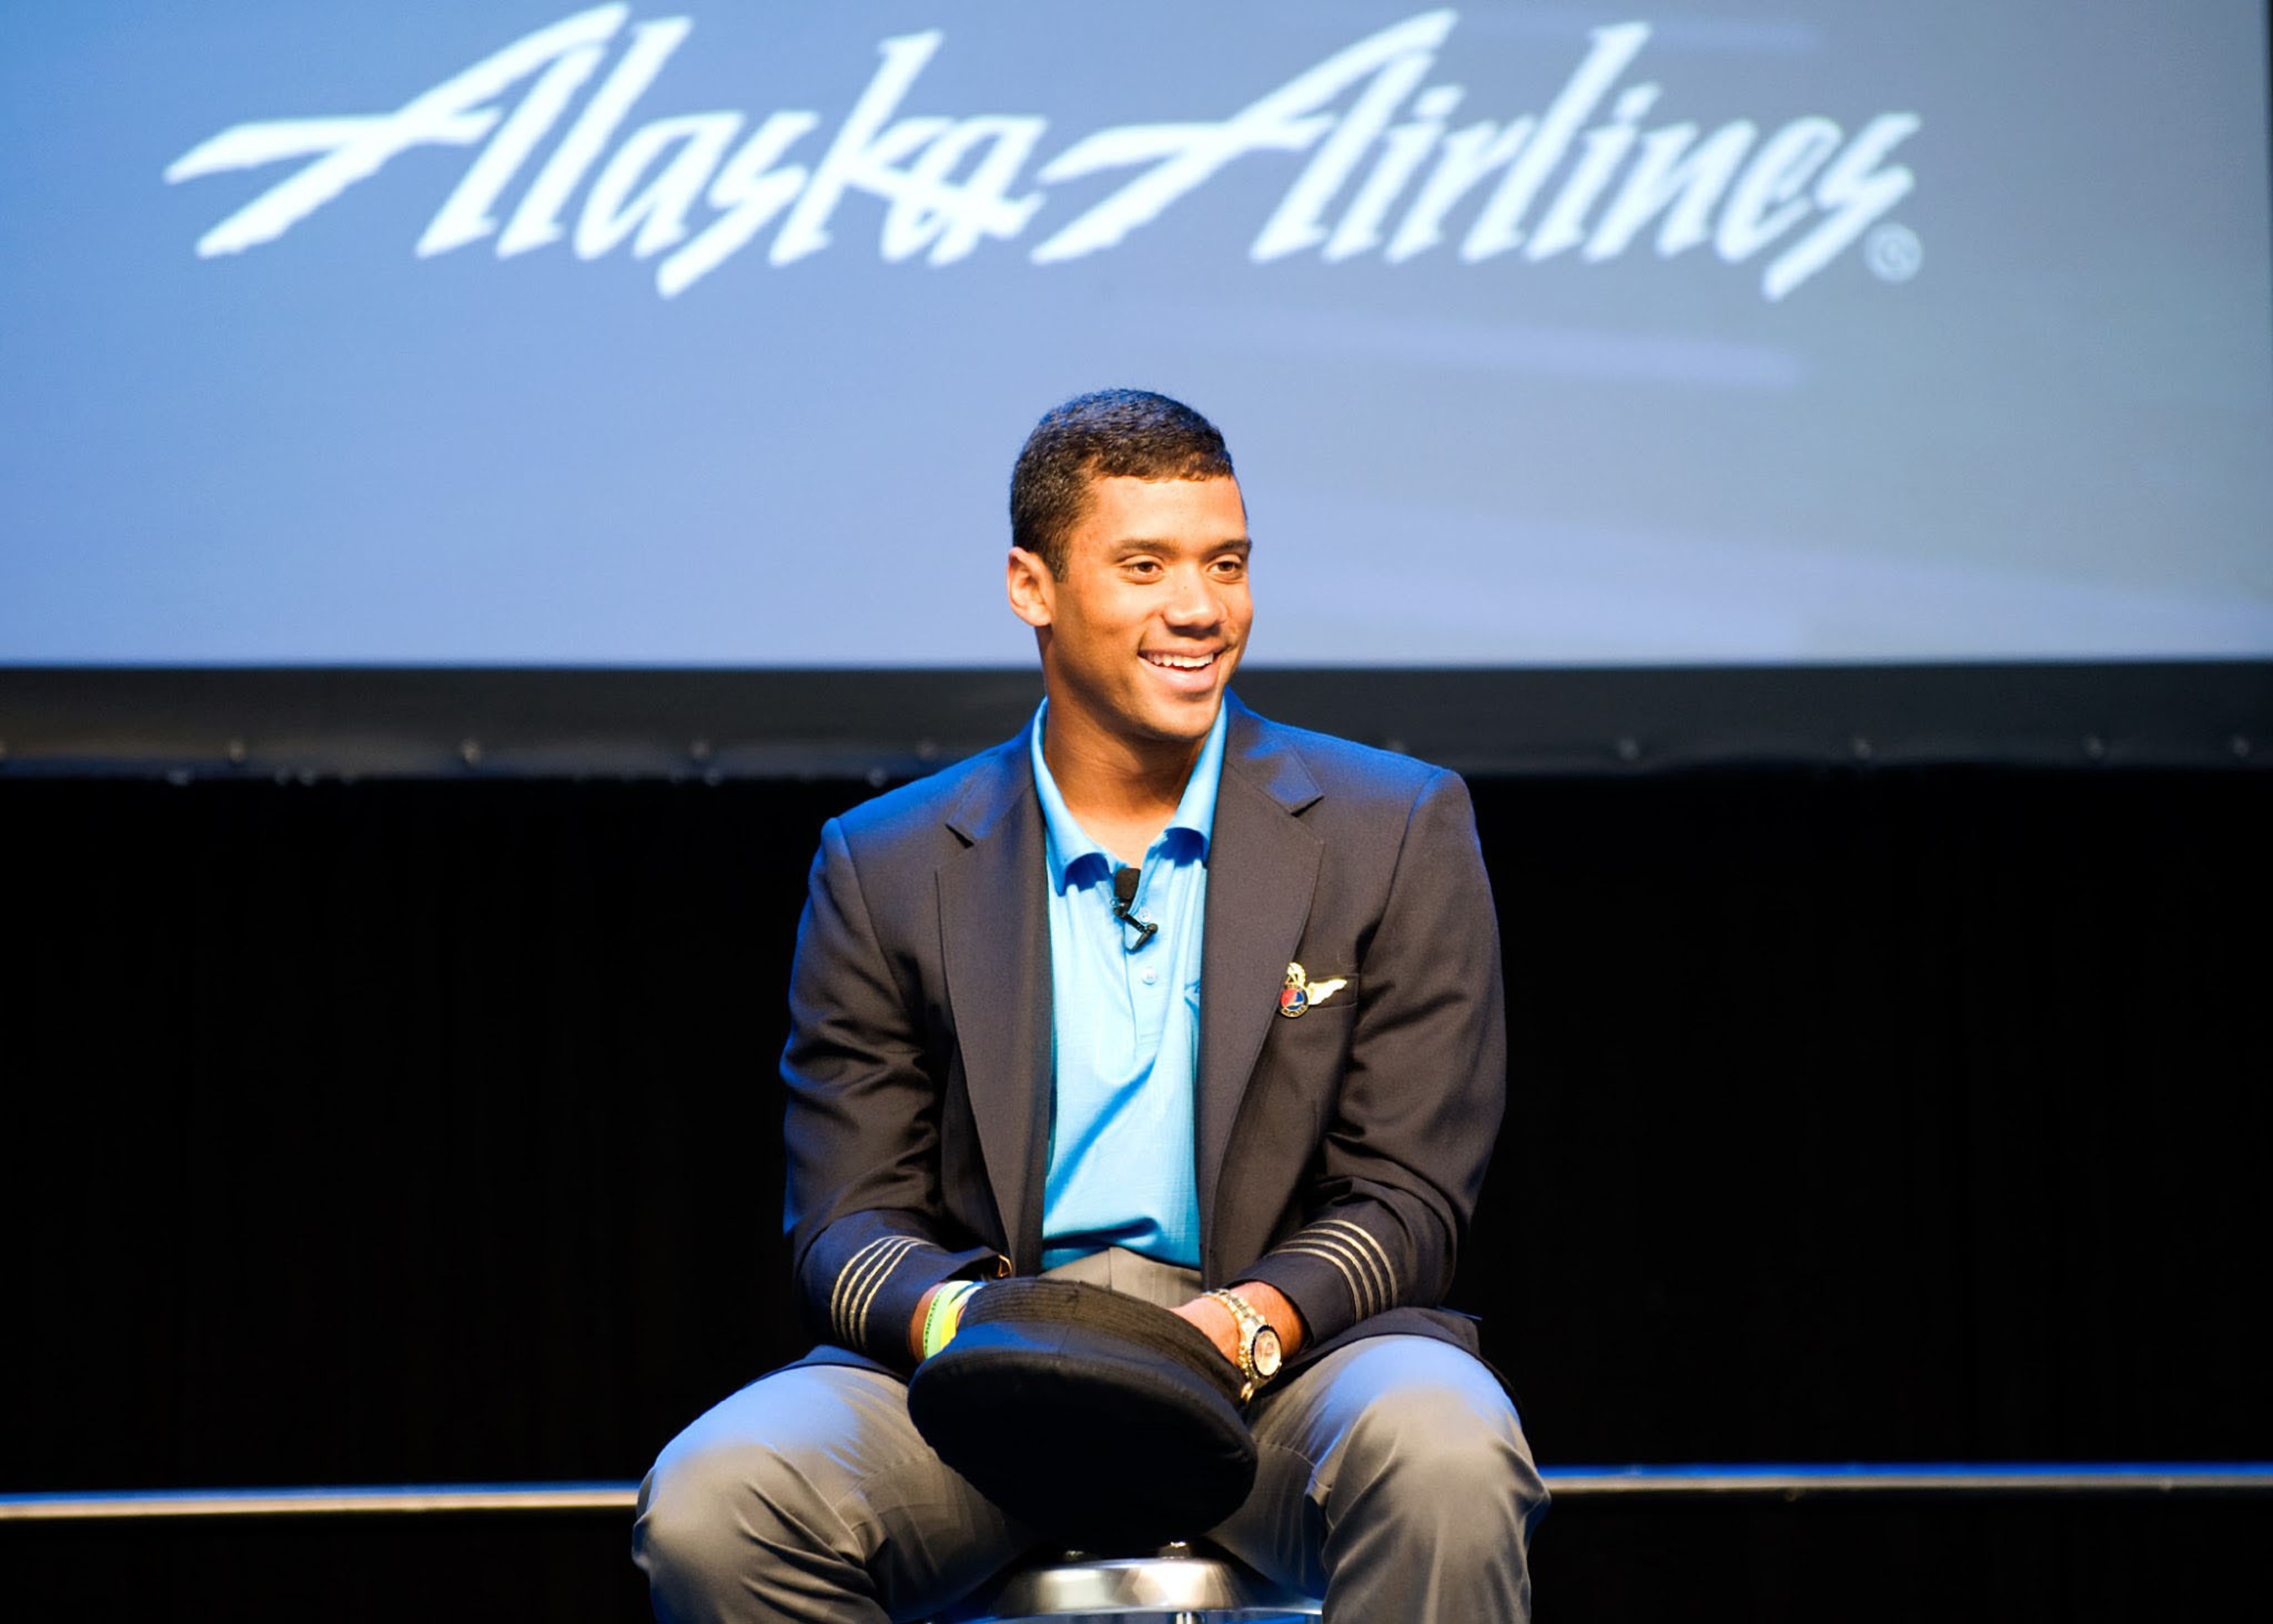 Seattle Seahawks quarterback Russell Wilson joins the Alaska Airlines team as "Chief Football Officer.". (PRNewsFoto/Alaska Airlines) (PRNewsFoto/ALASKA AIRLINES)